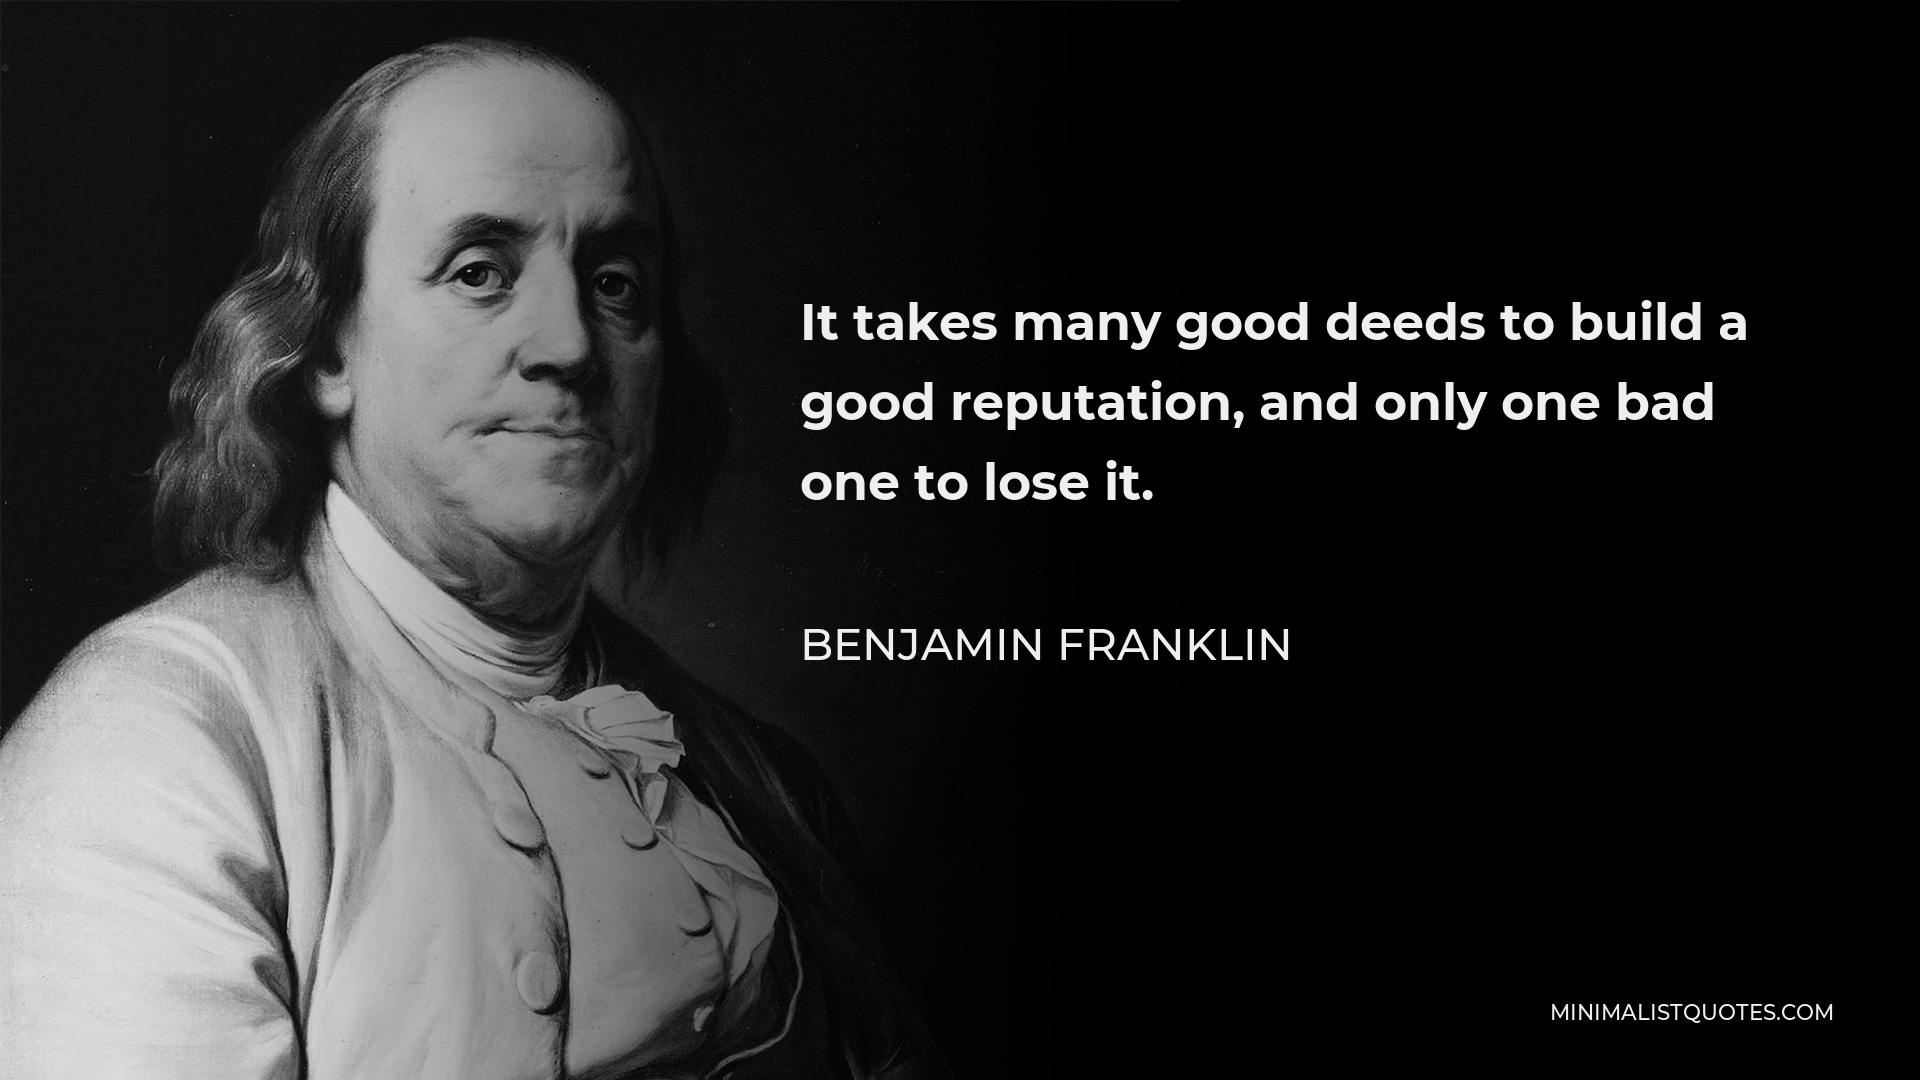 Benjamin Franklin Quote - It takes many good deeds to build a good reputation, and only one bad one to lose it.